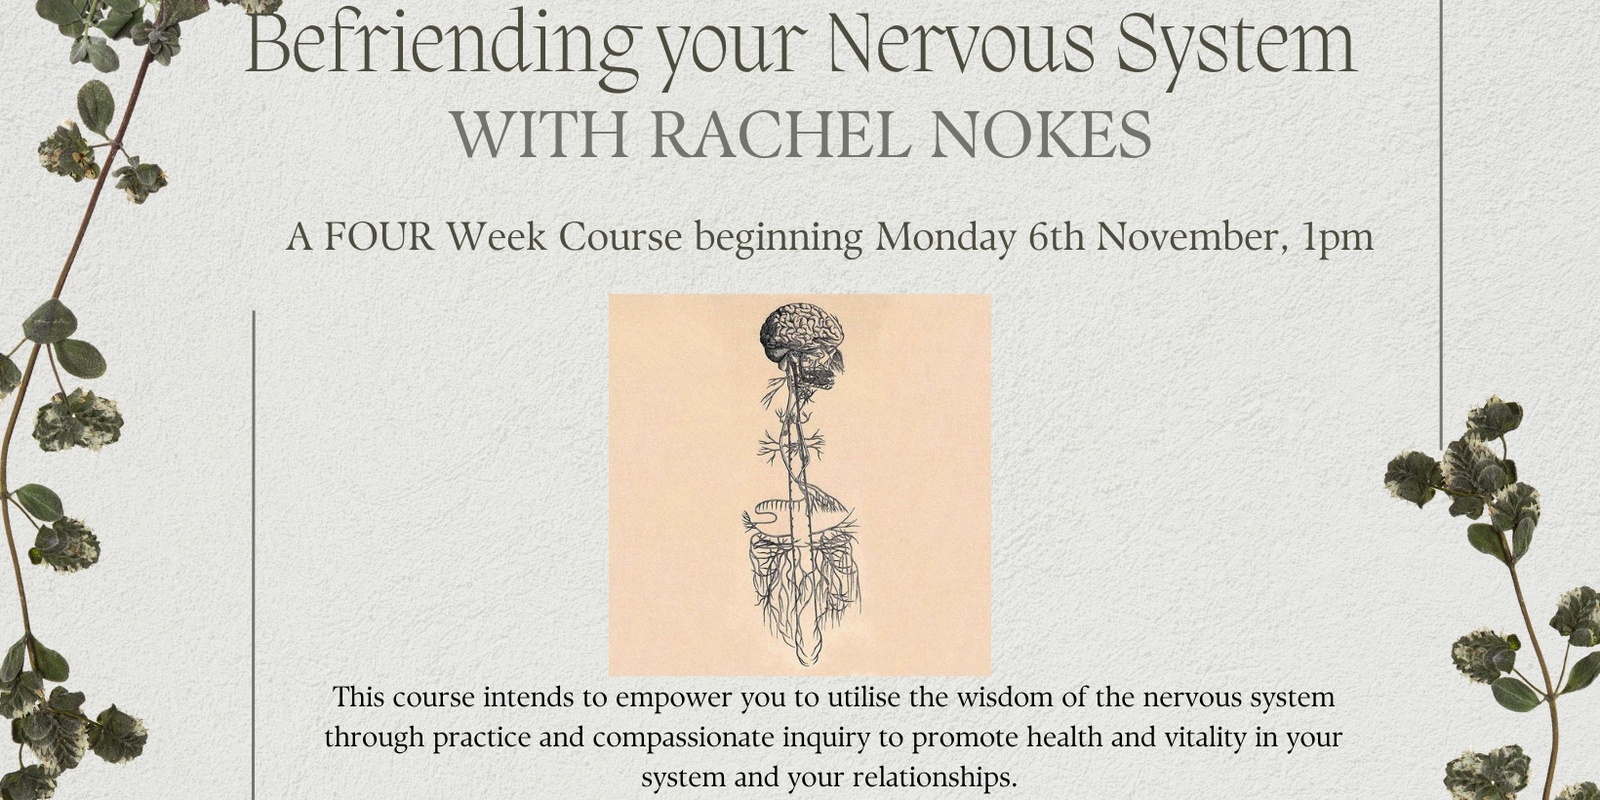 Banner image for Befriending your Nervous System: A Four Week Course with Rachel Nokes